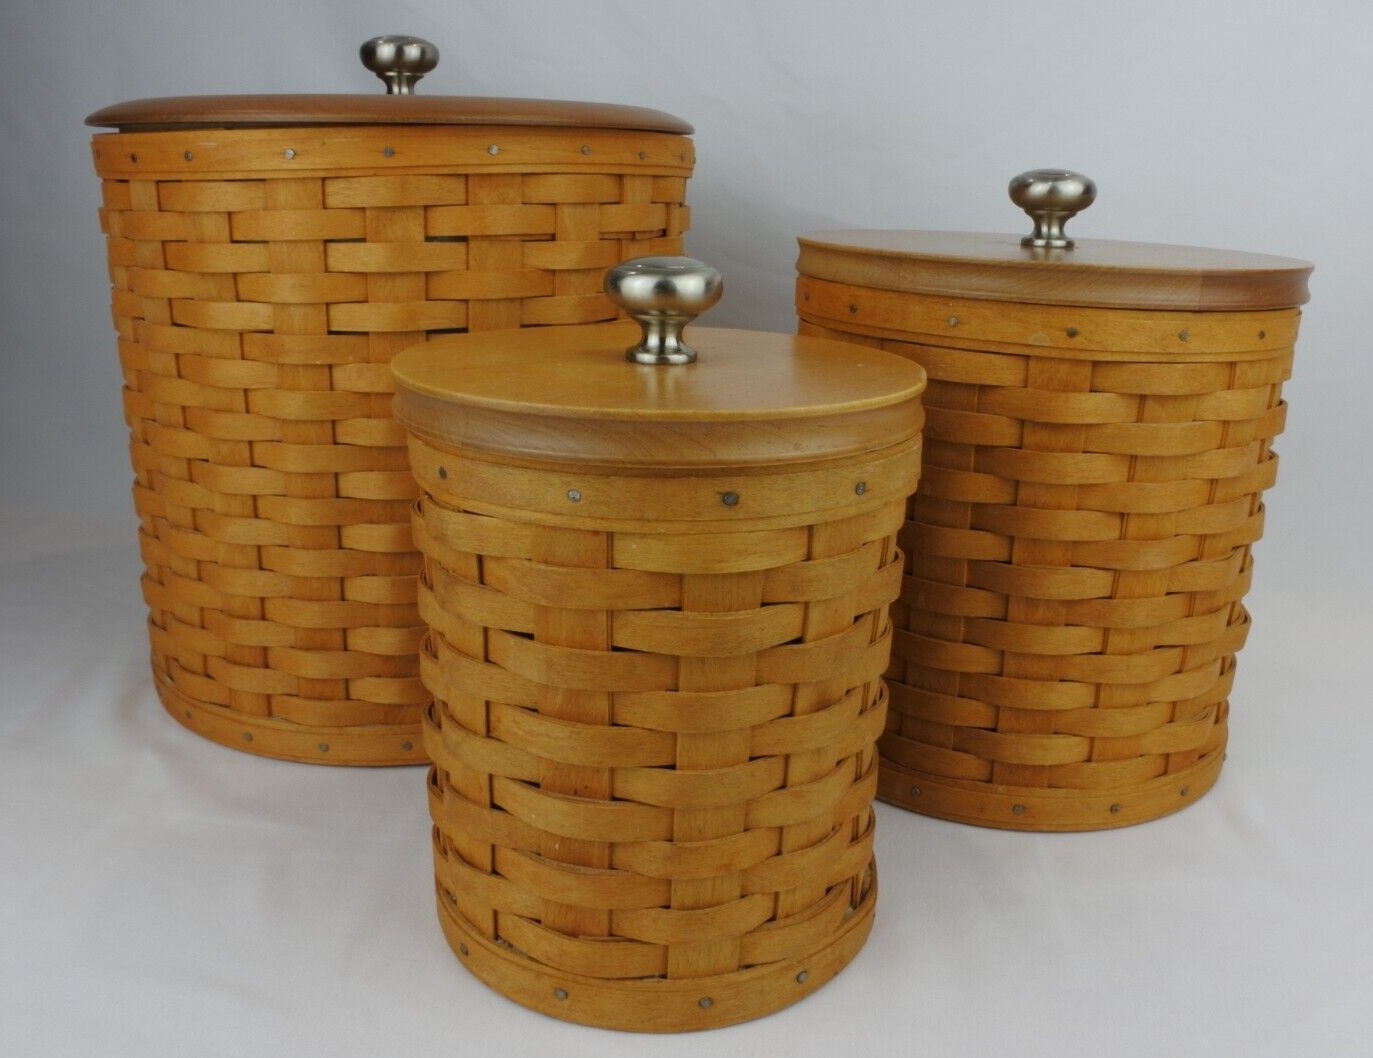 2005 Longaberger Woven Crock Canister Set of 3 with Protectors and Lids 12 pcs